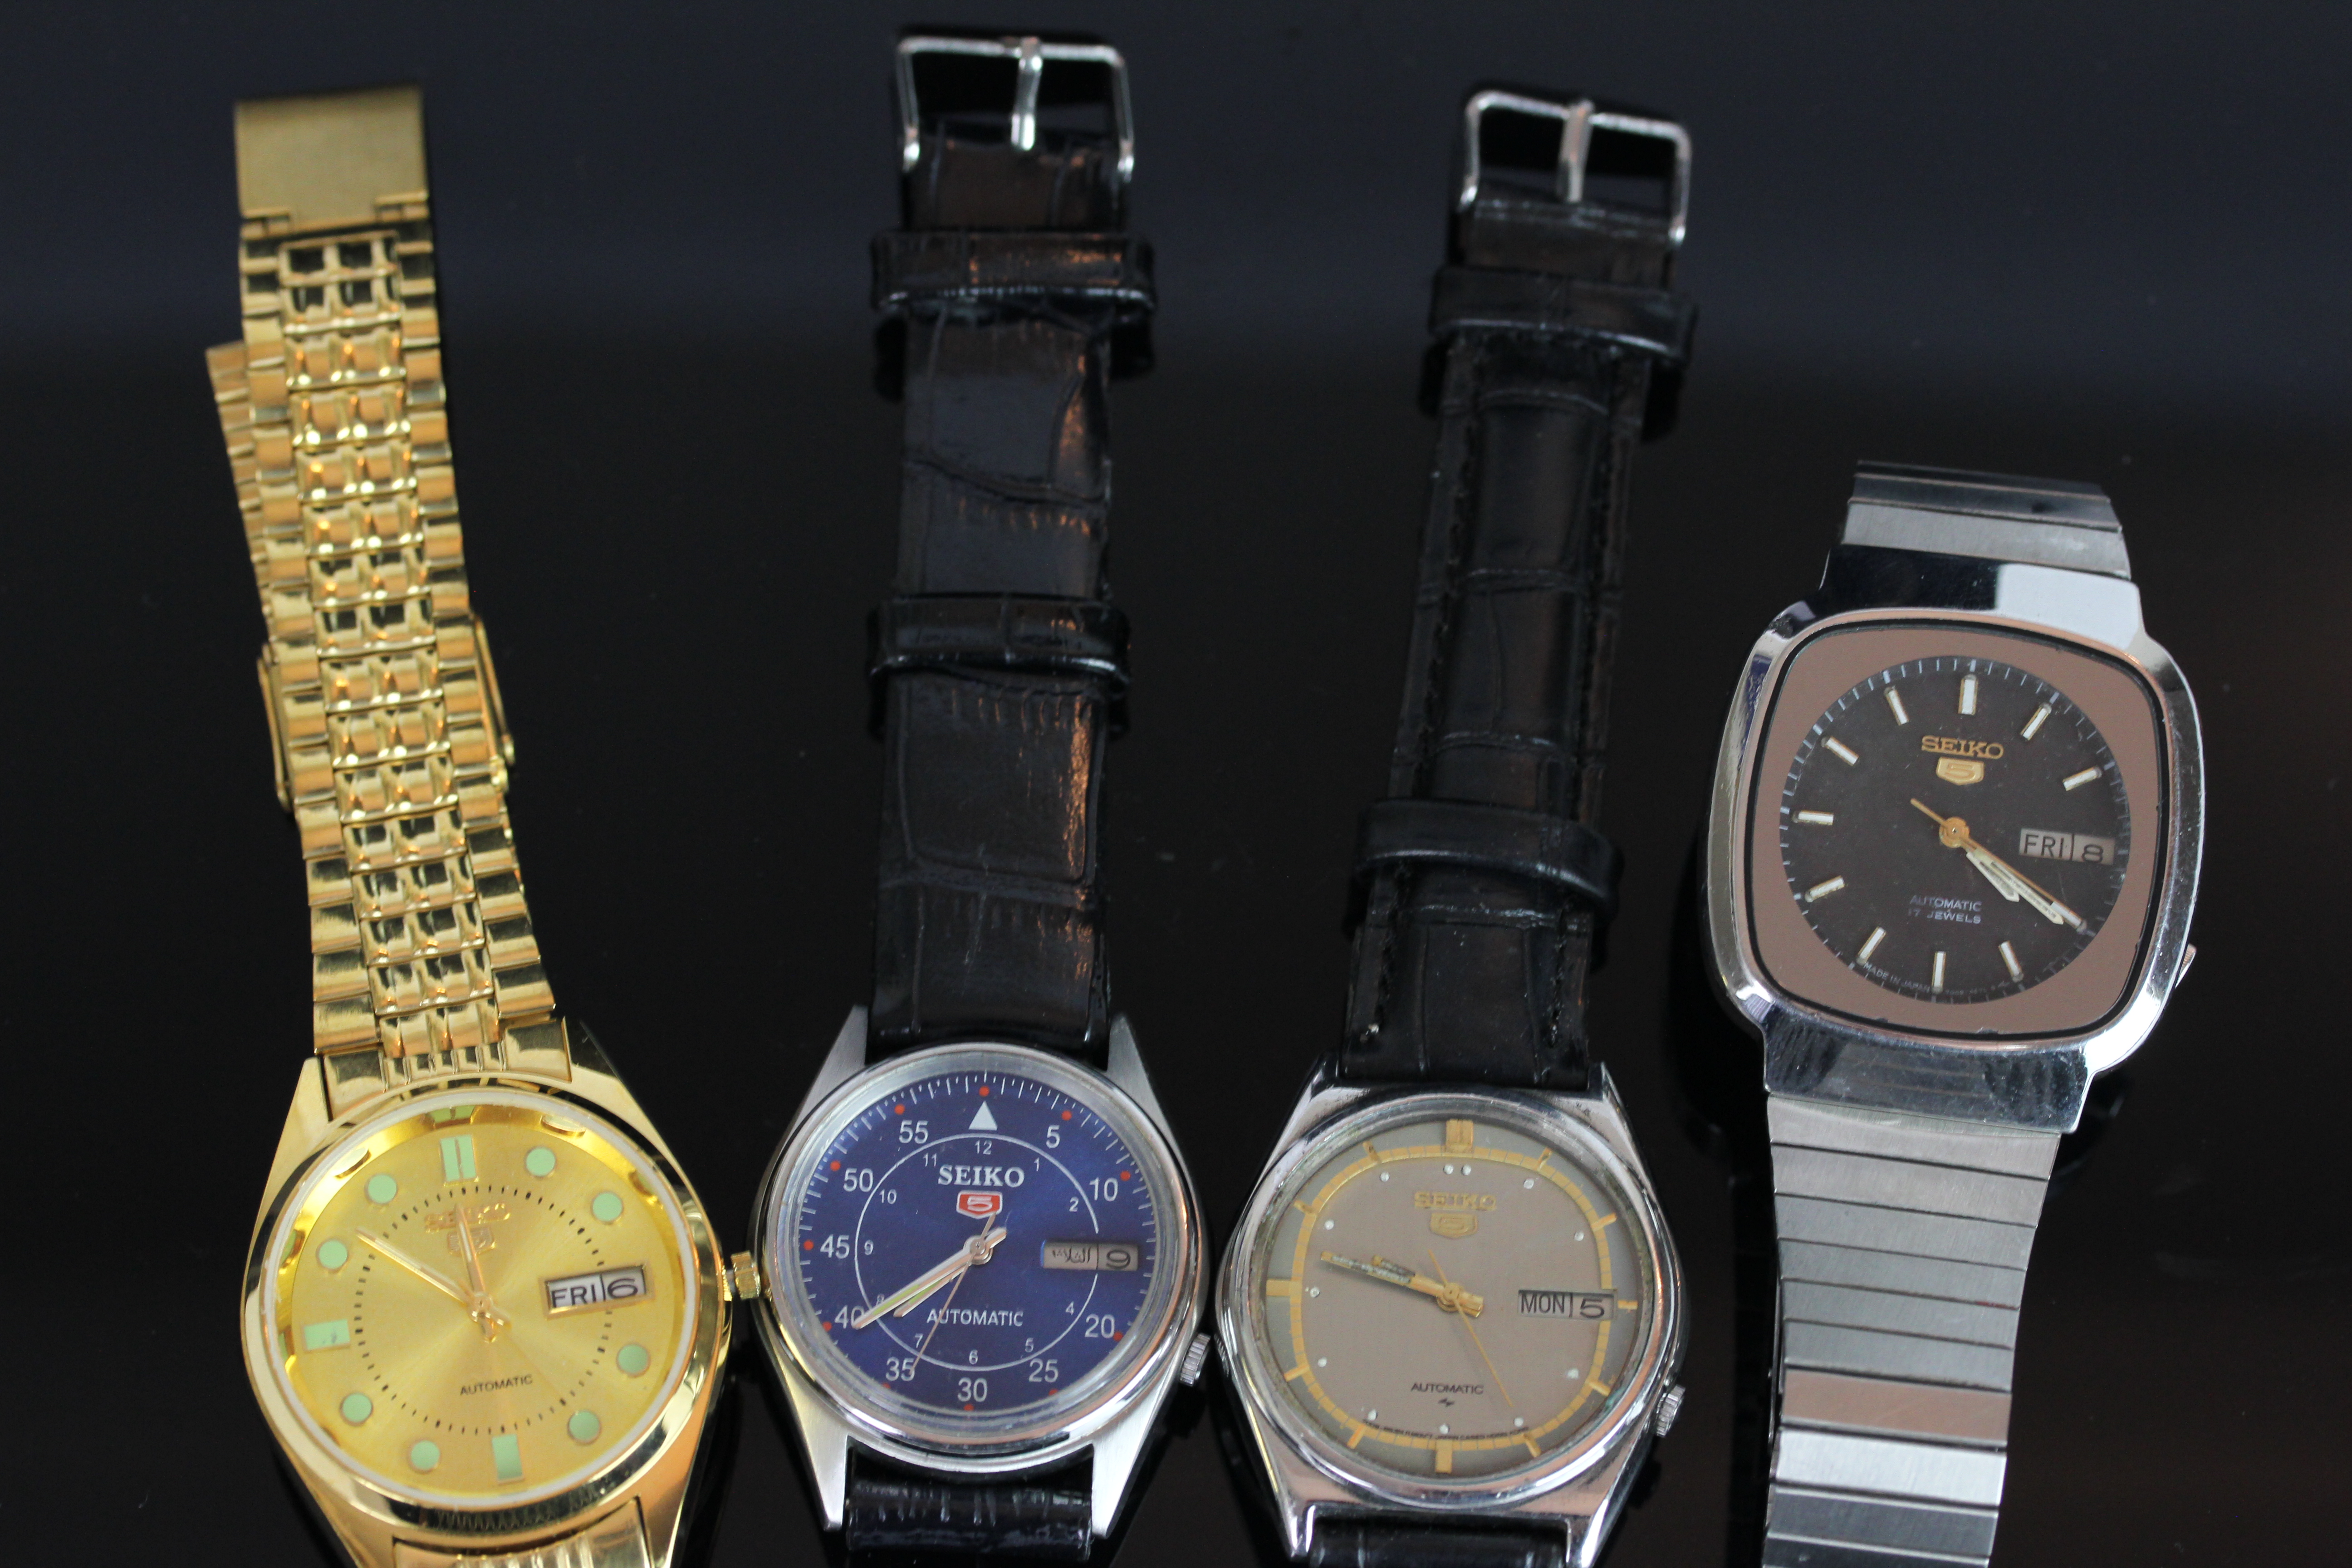 GROUP OF SEIKO 5 WRISTWATCHES, all four watches are currently running.